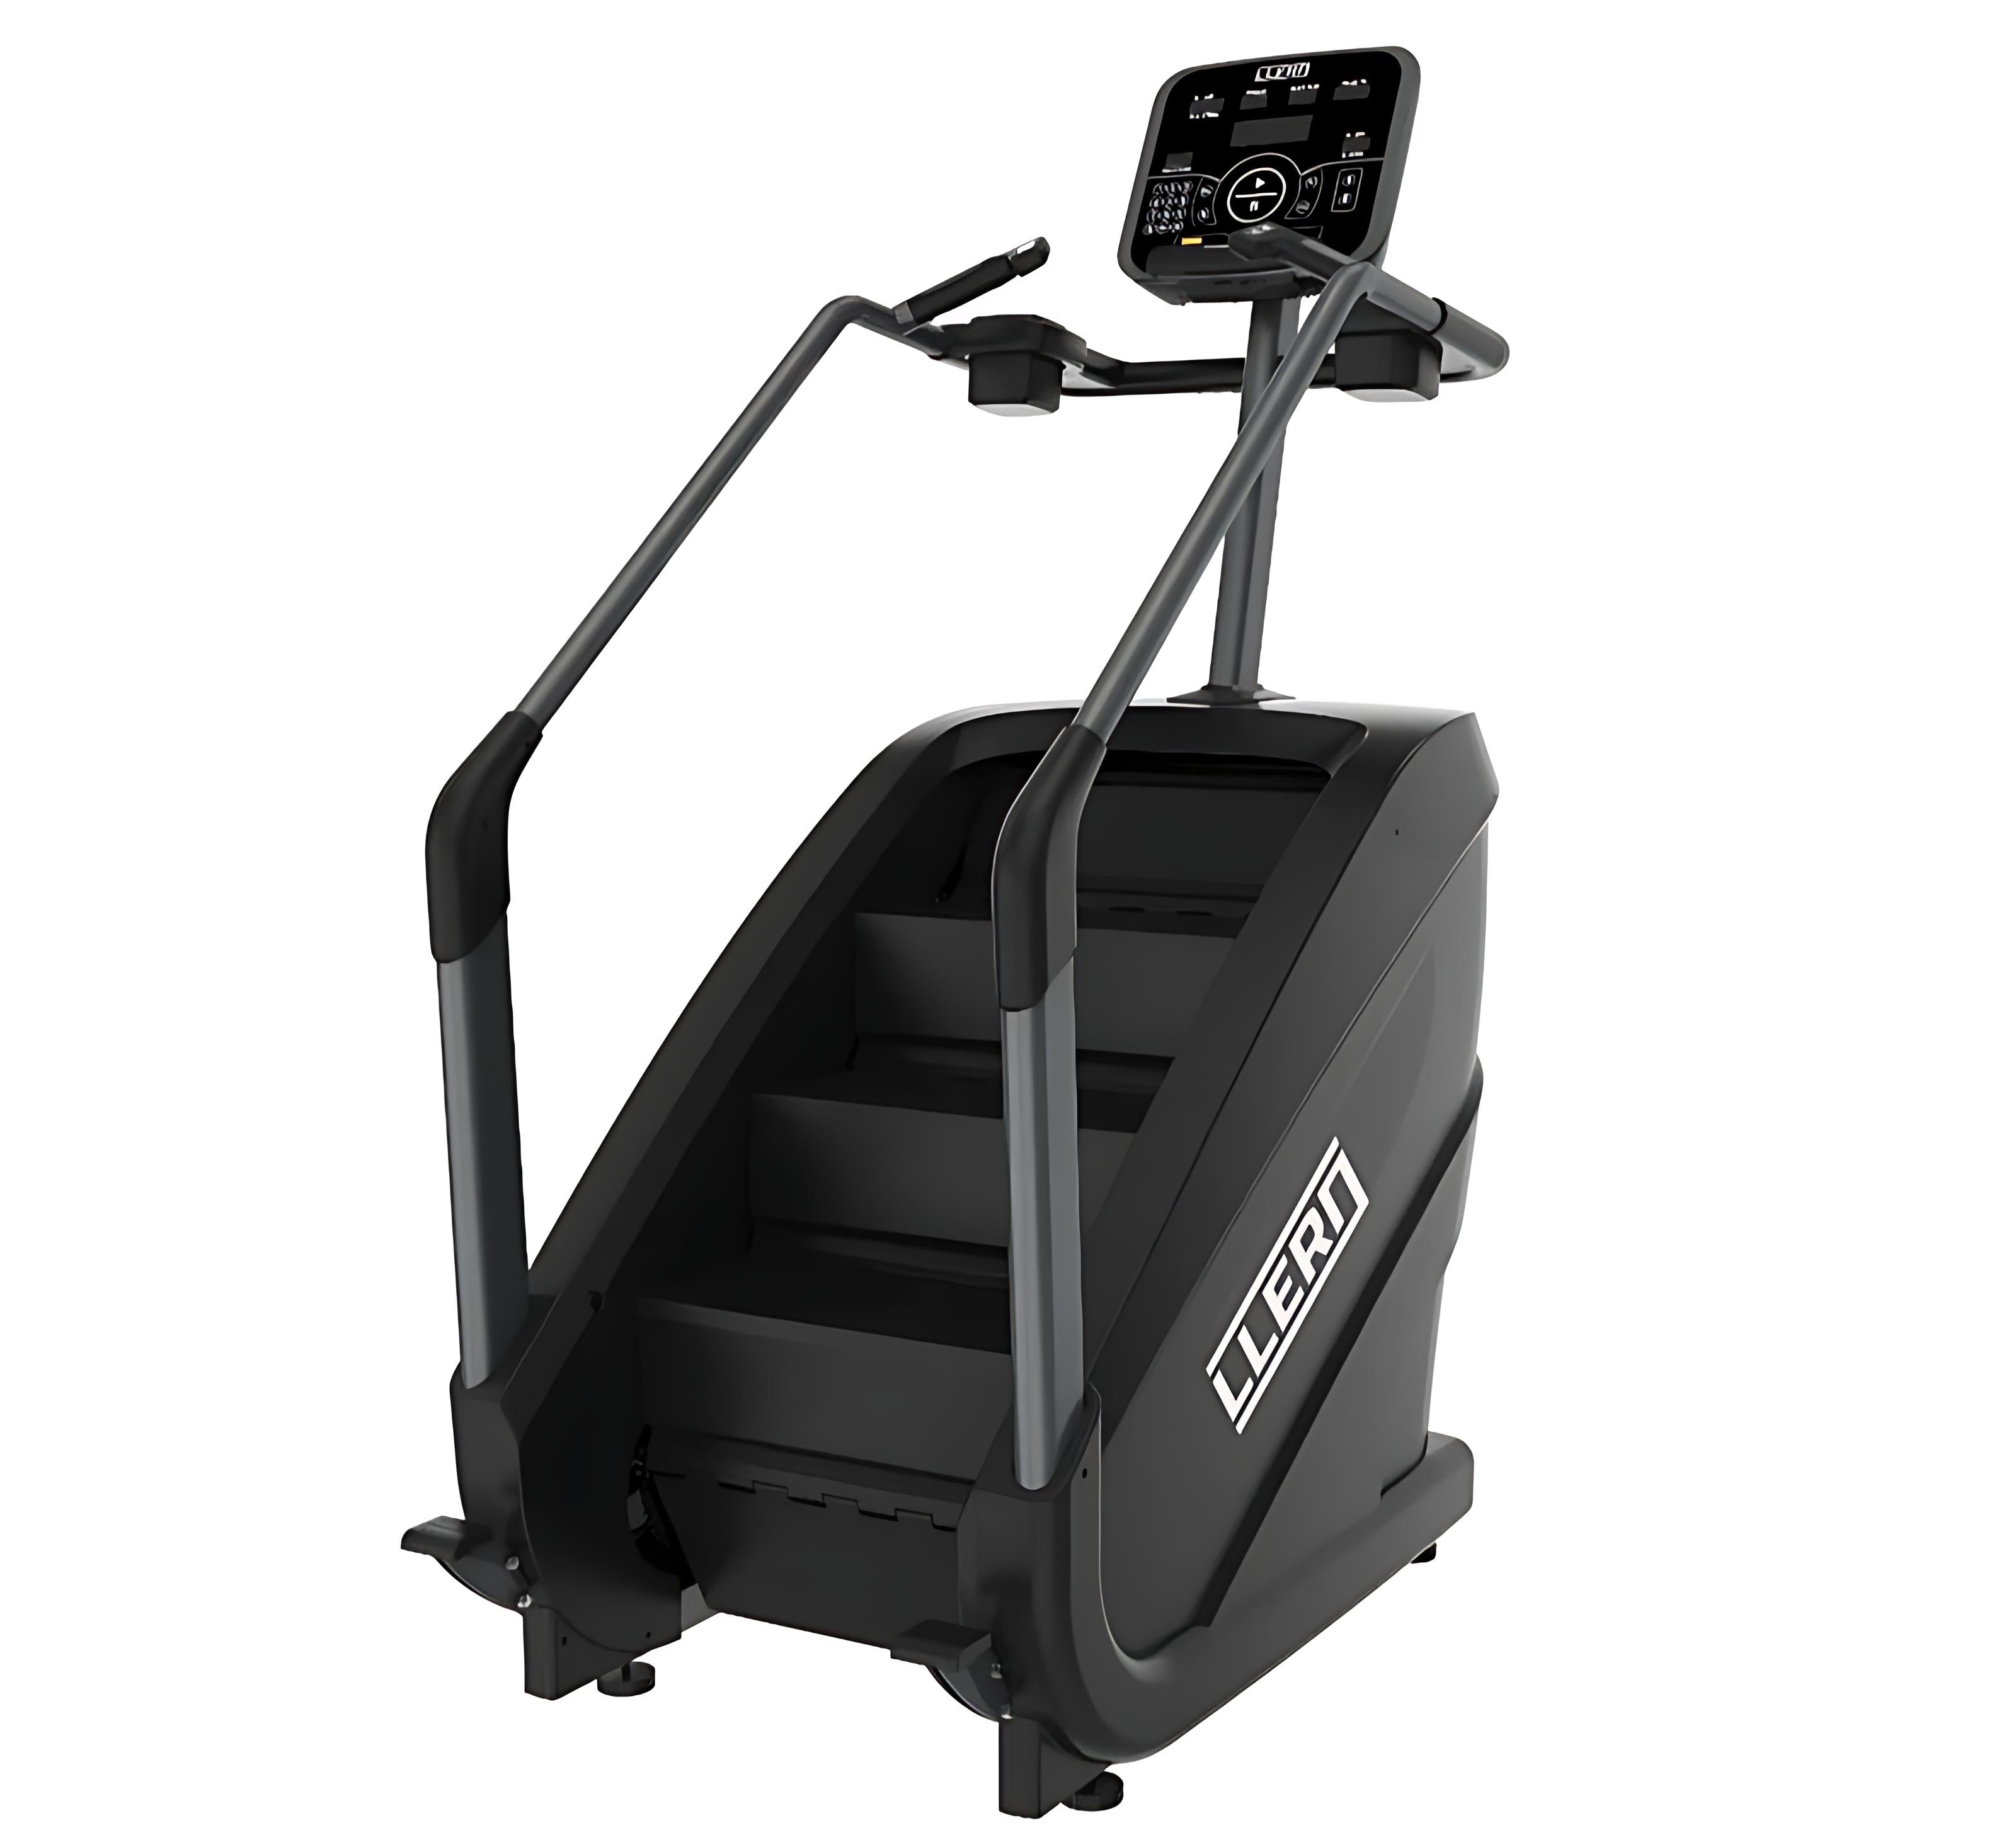 LLERO Commercial X3 Stairmaster / Stair Climber